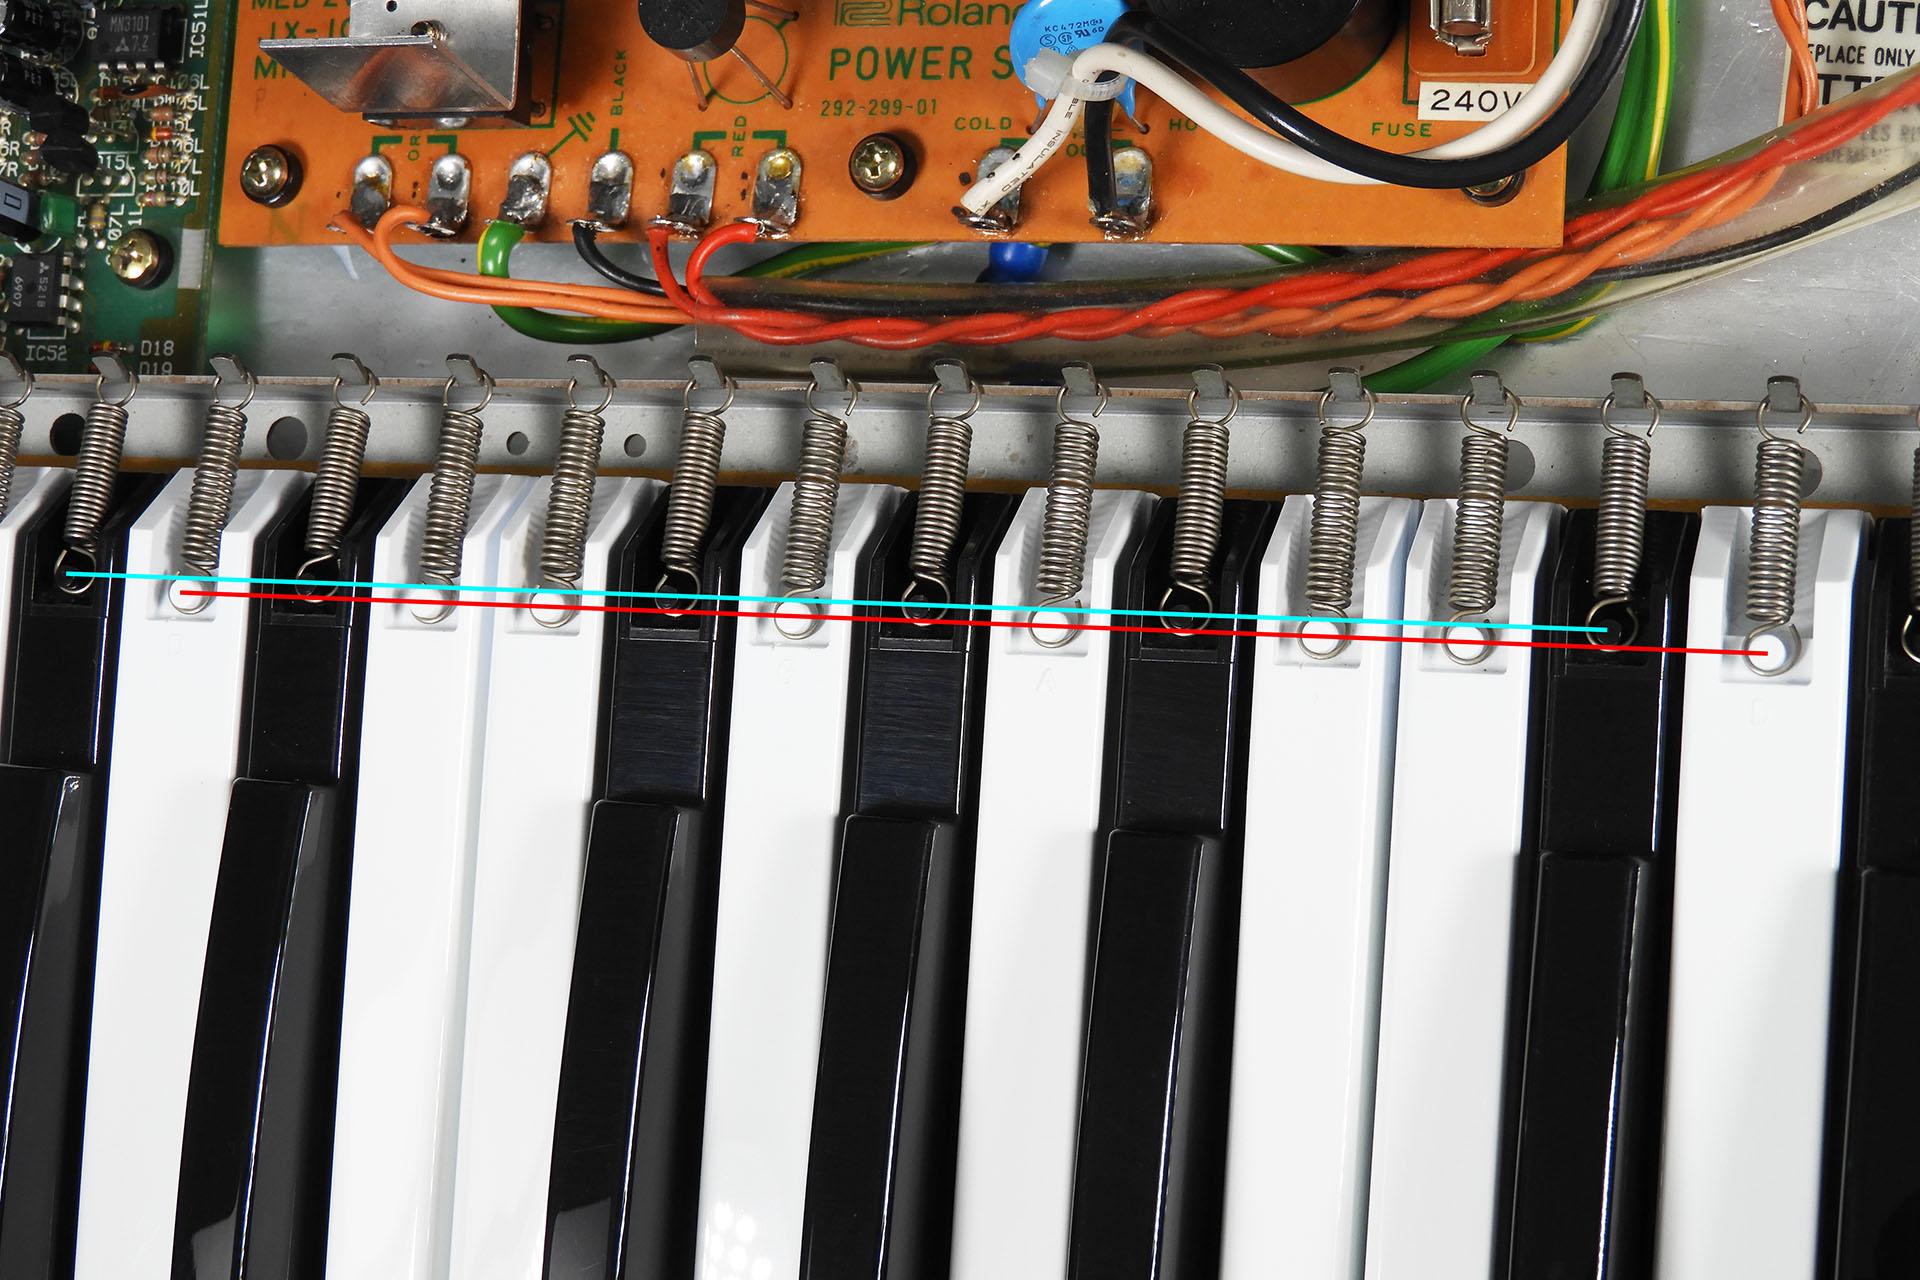 Black and white keys have different length key tension springs on the Roland JX-10